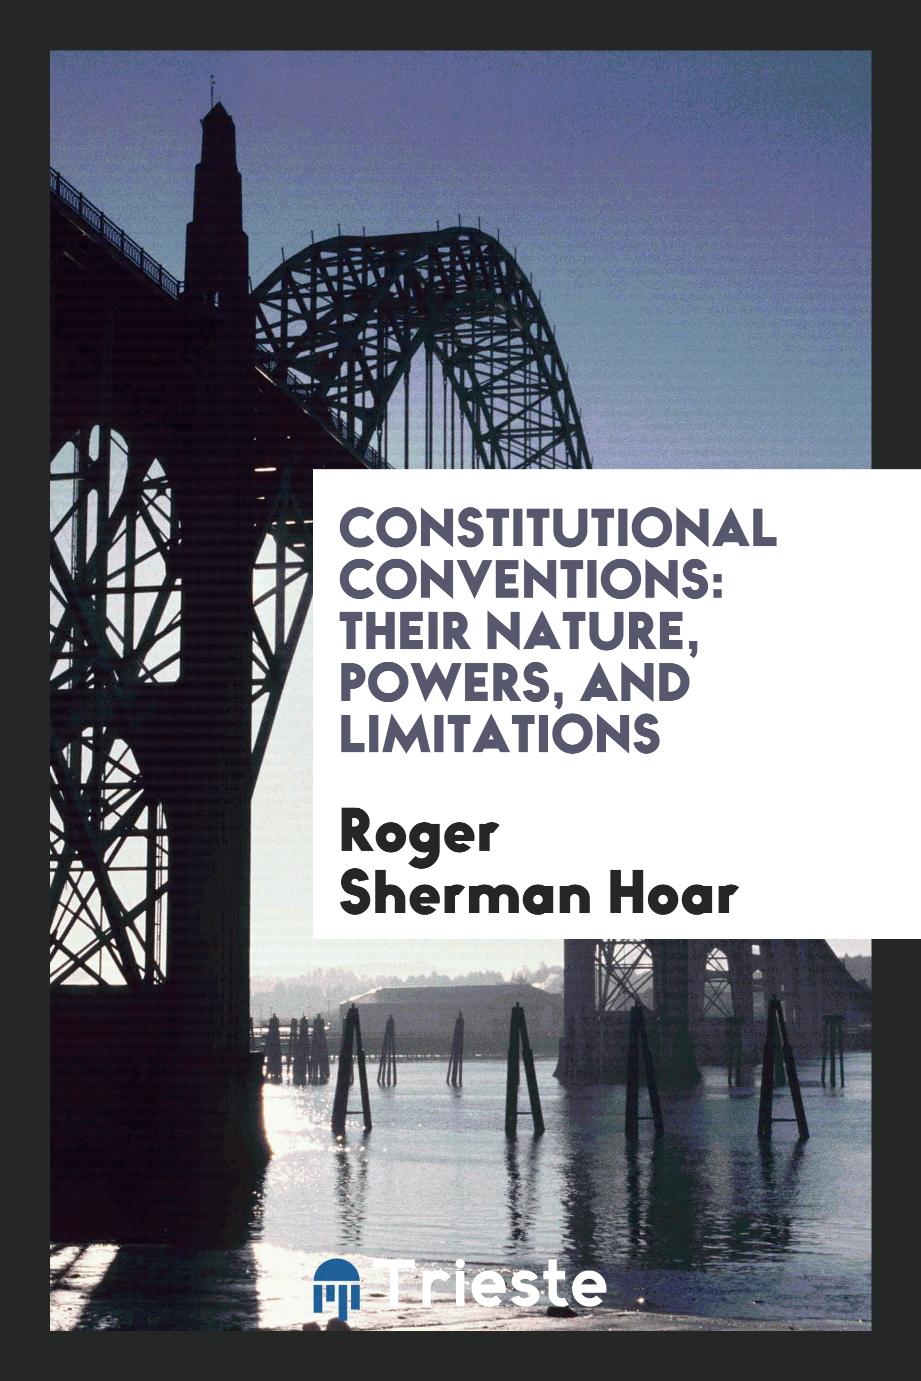 Constitutional conventions: their nature, powers, and limitations